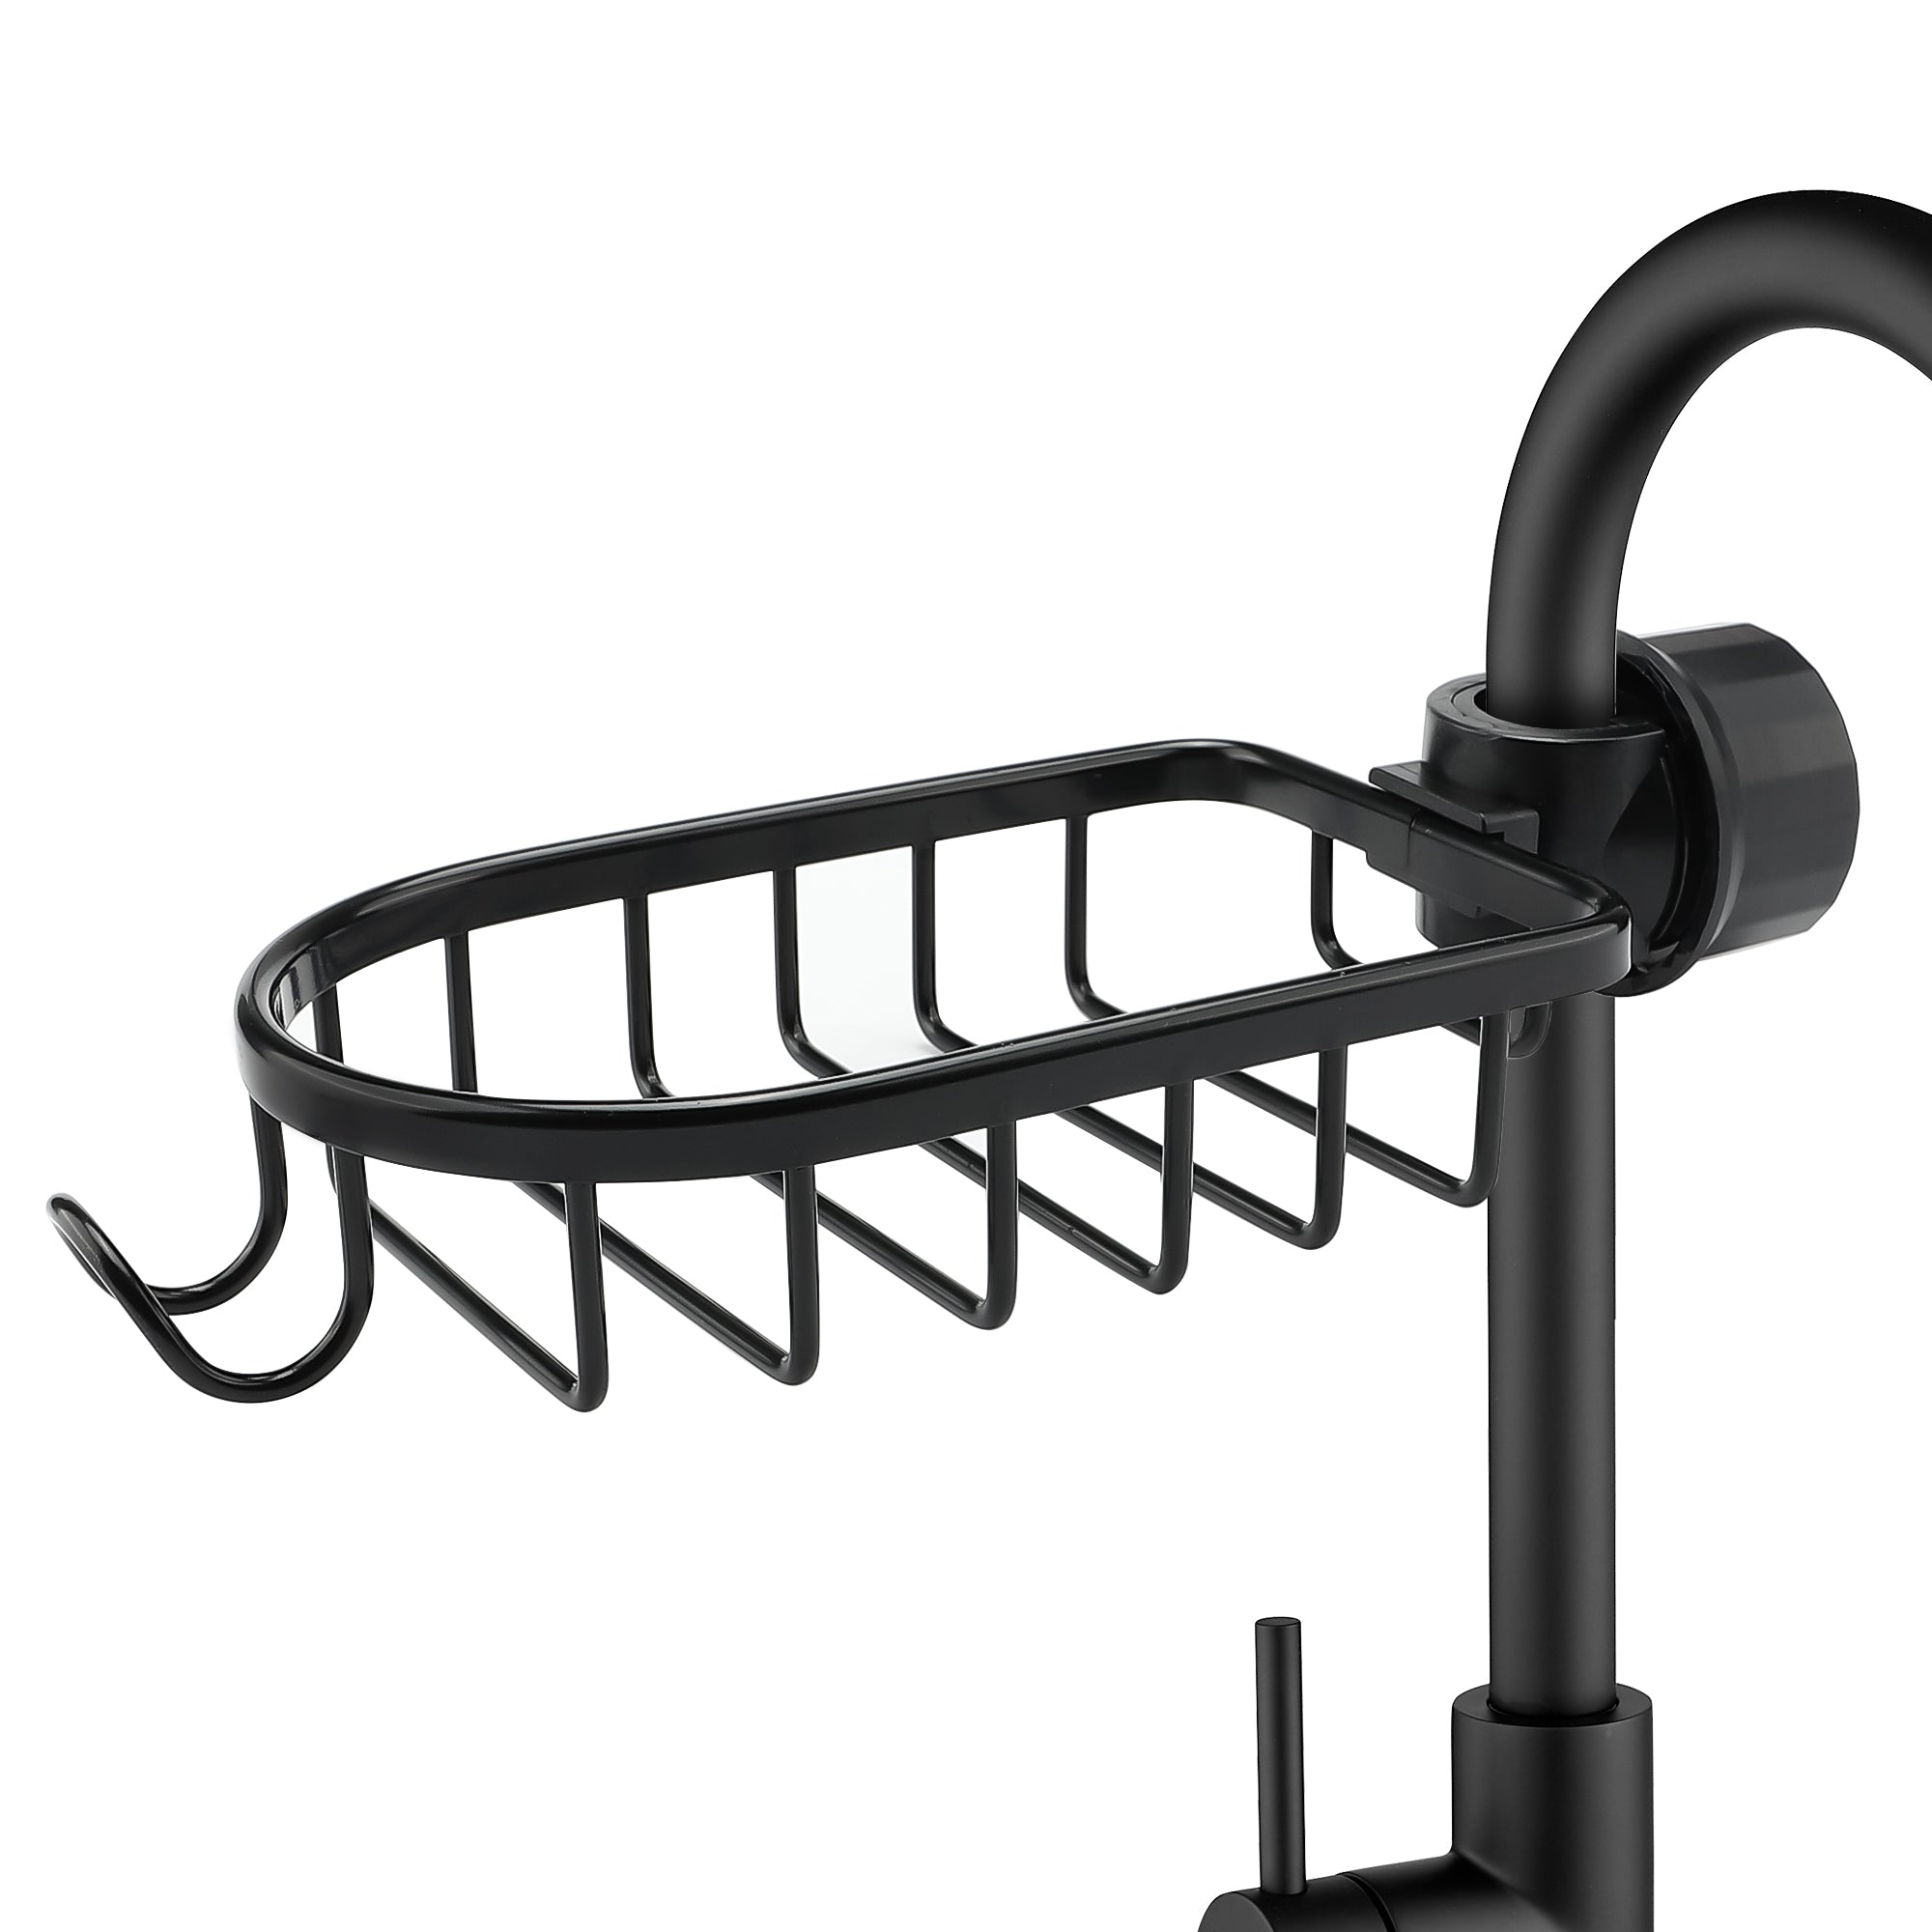  WINGSIGHT Faucet Sponge Holder Kitchen Sink Caddy Organizer  Over Faucet Hanging Faucet Drain Rack for Sink Organizer (Upgraded with  Dishcloth Rack, Black): Home & Kitchen